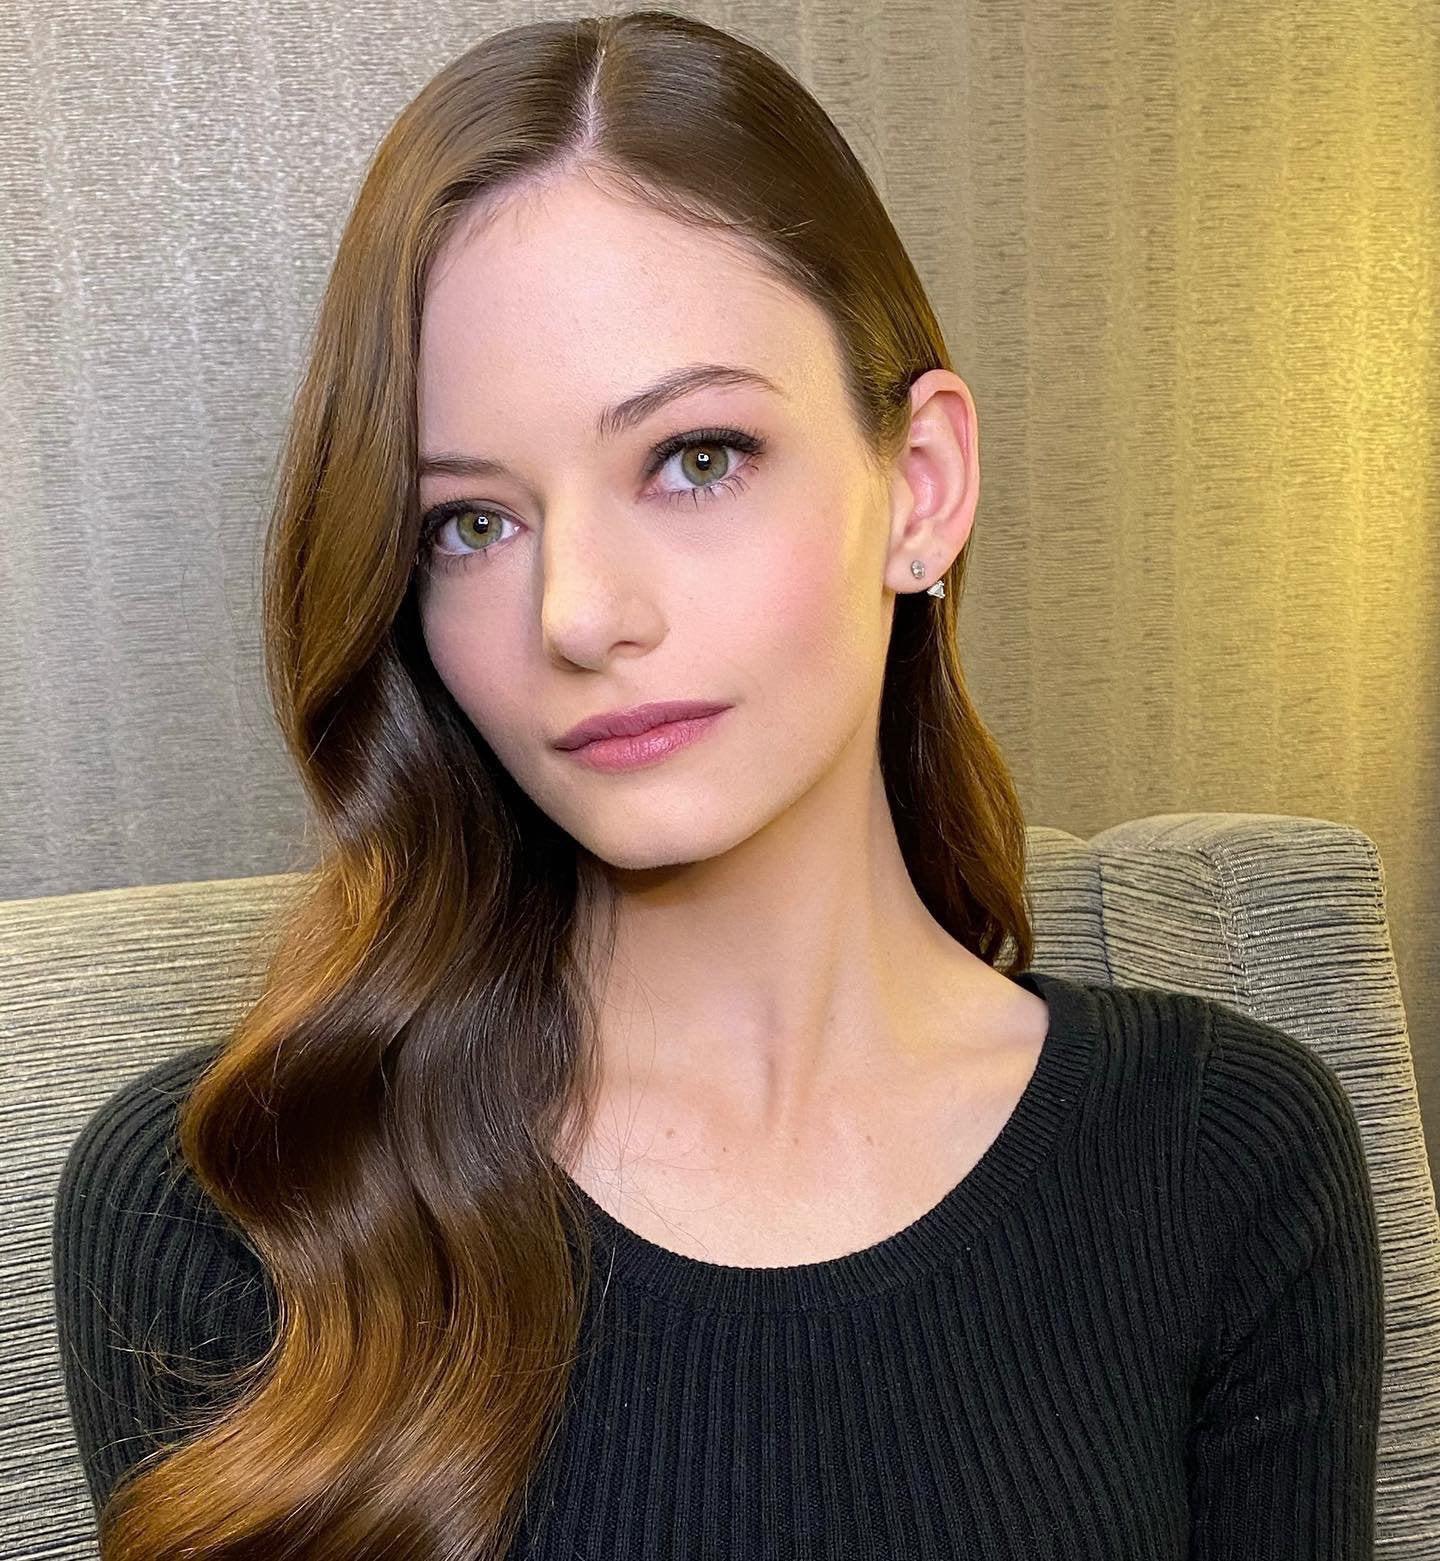 Love Stroking To Celeb Faces Like Mackenzie Foy Just Her Face Makes Me Throb Uncontrollably